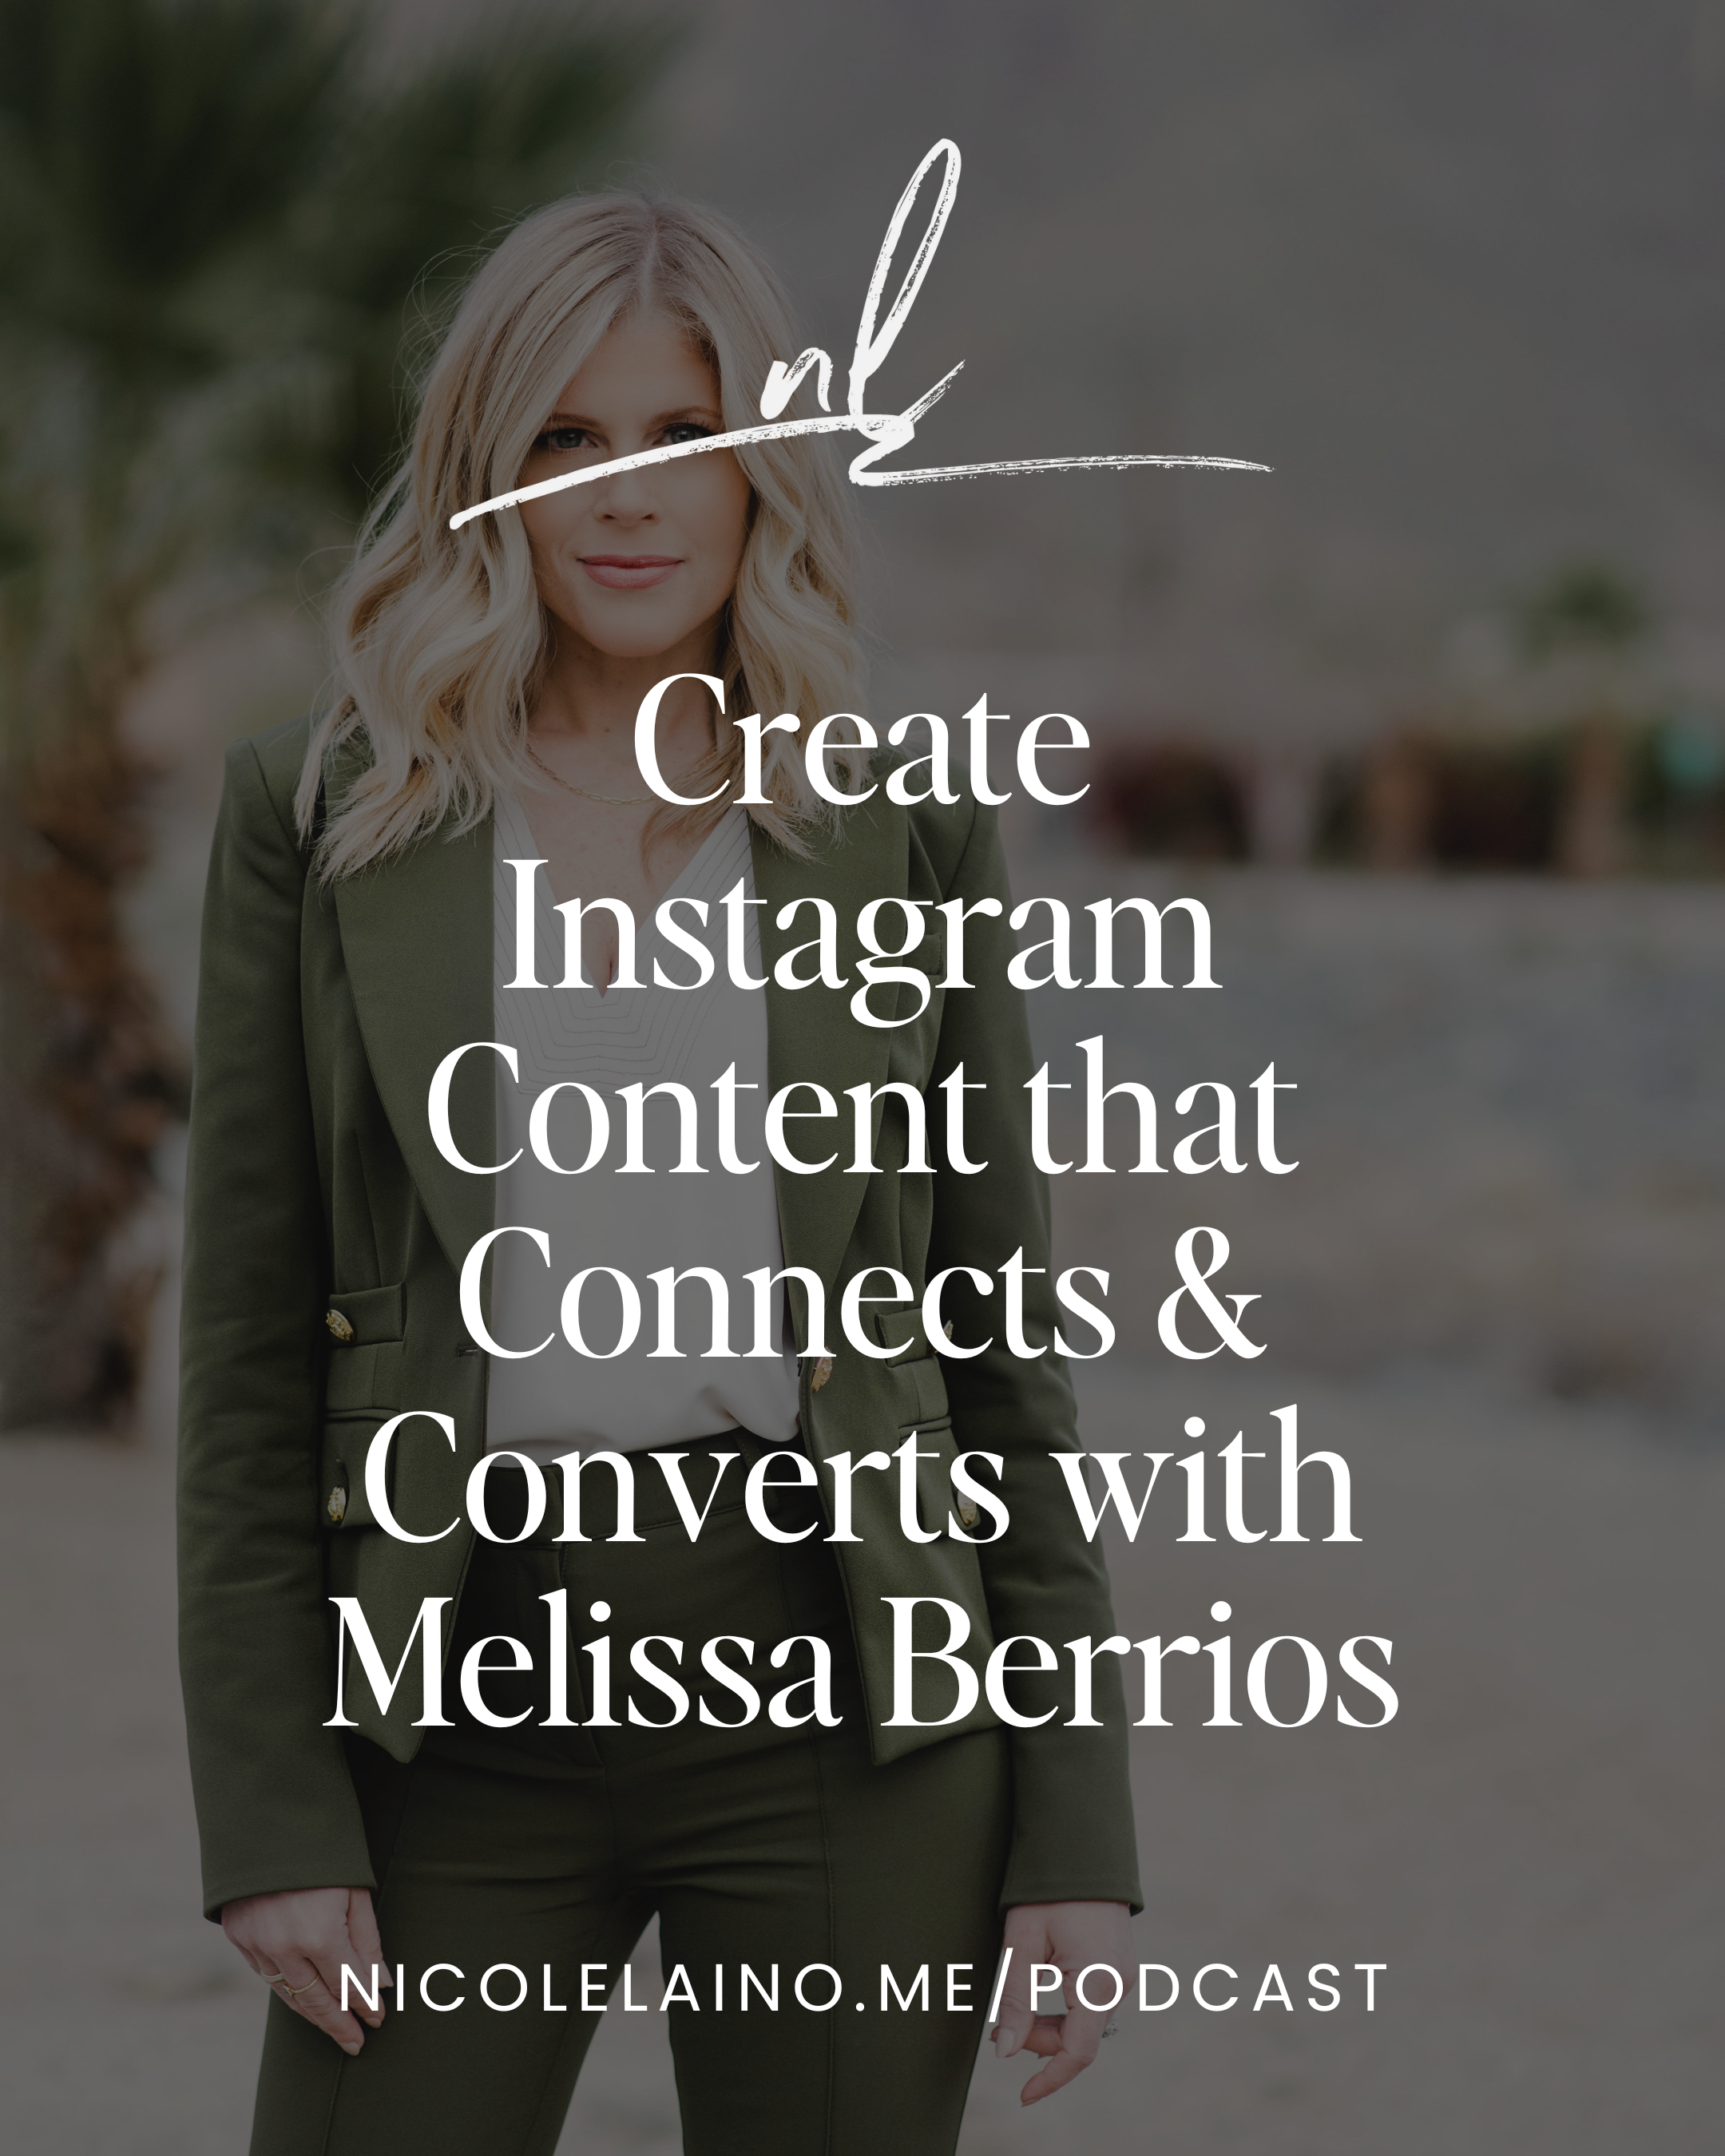 Create Instagram Content that Connects & Converts with Melissa Berrios